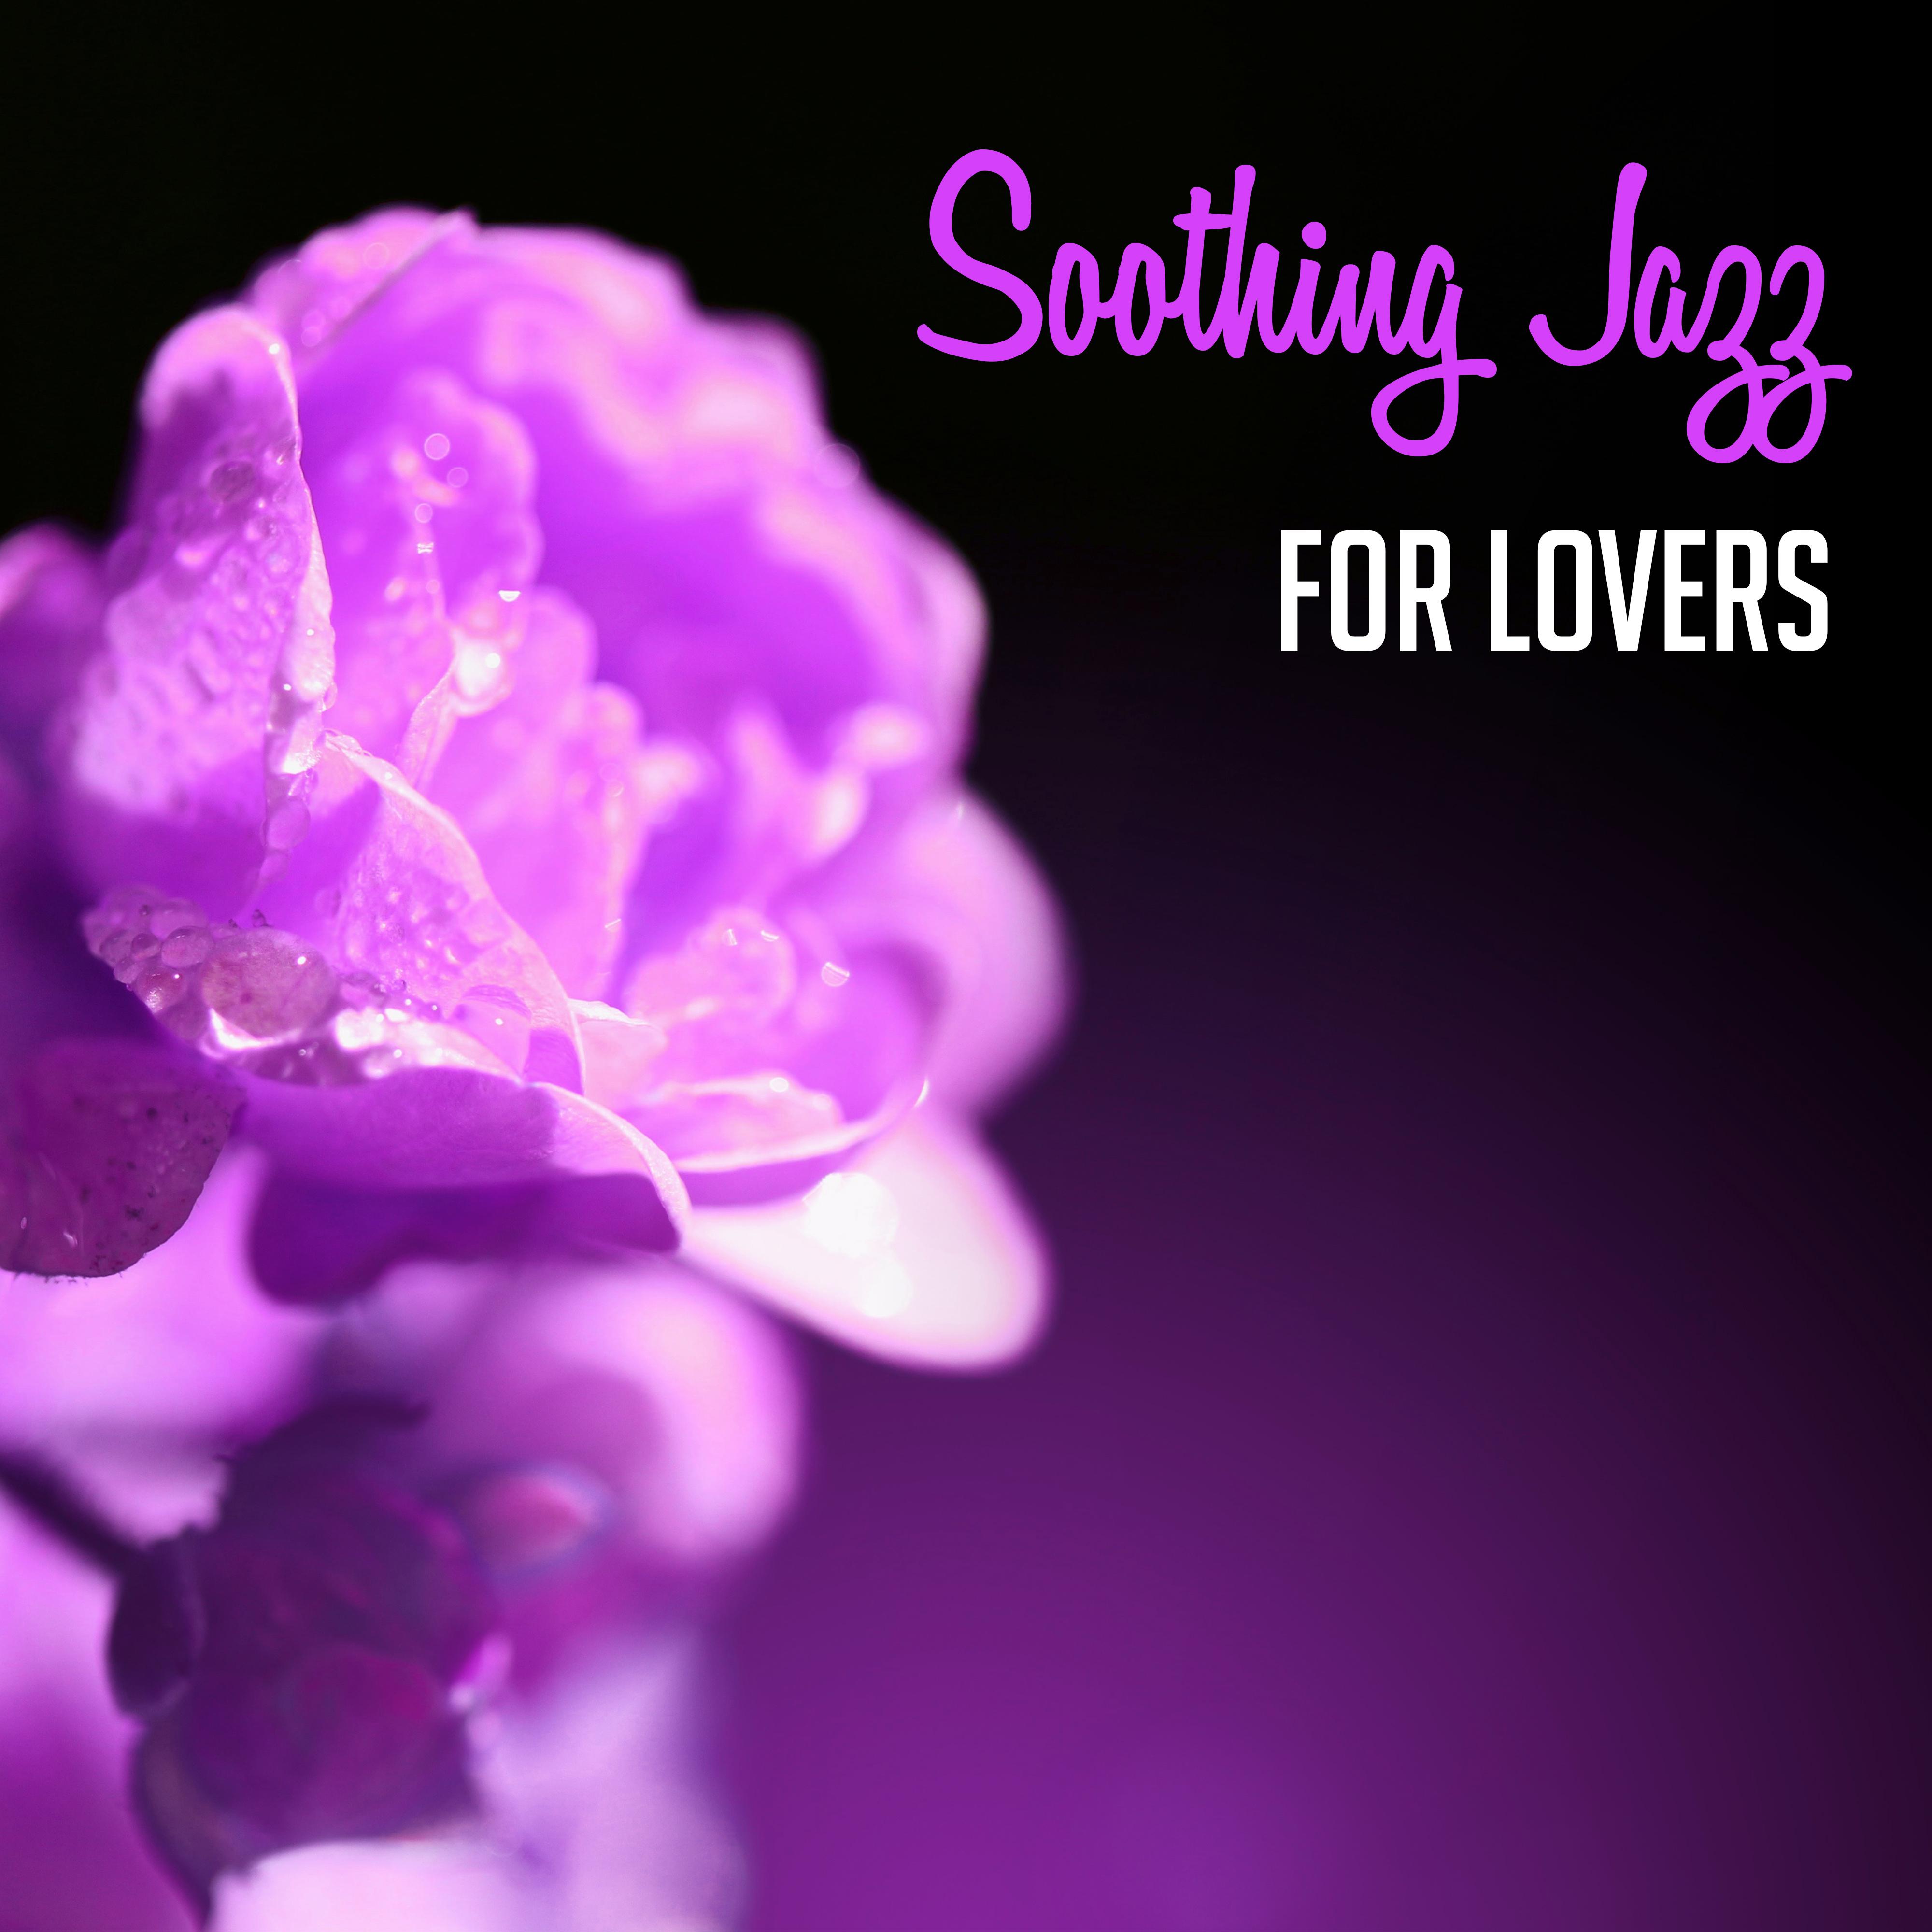 Soothing Jazz for Lovers – Peaceful Music, Easy Listening, Romantic Jazz Sounds, Erotic Background Music